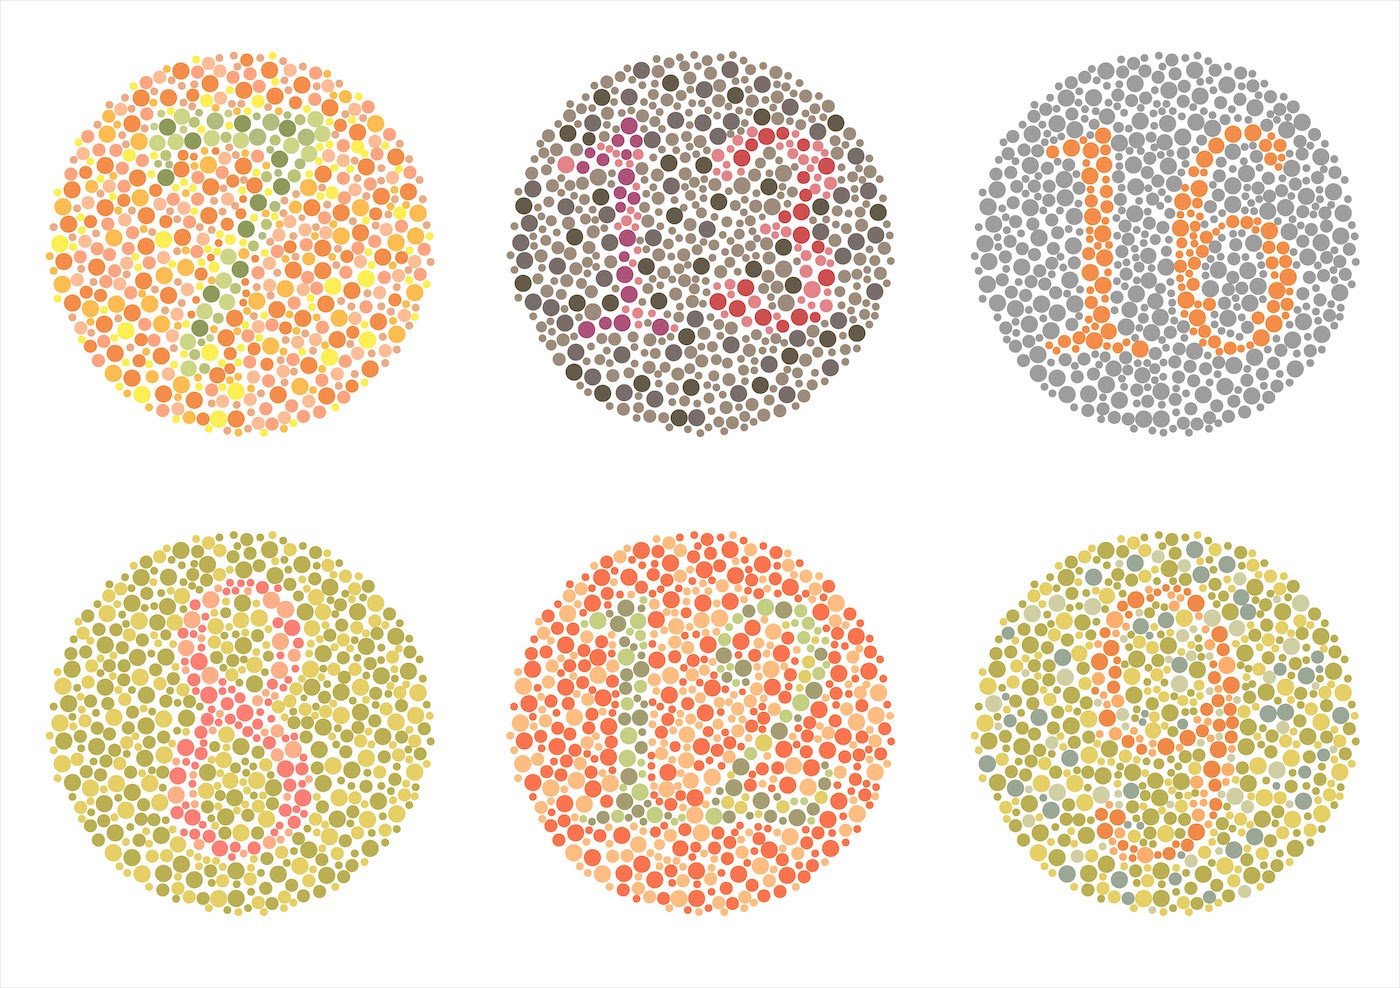 A screenshot from Dr. Shinobu Ishihara's test for color deficiency.